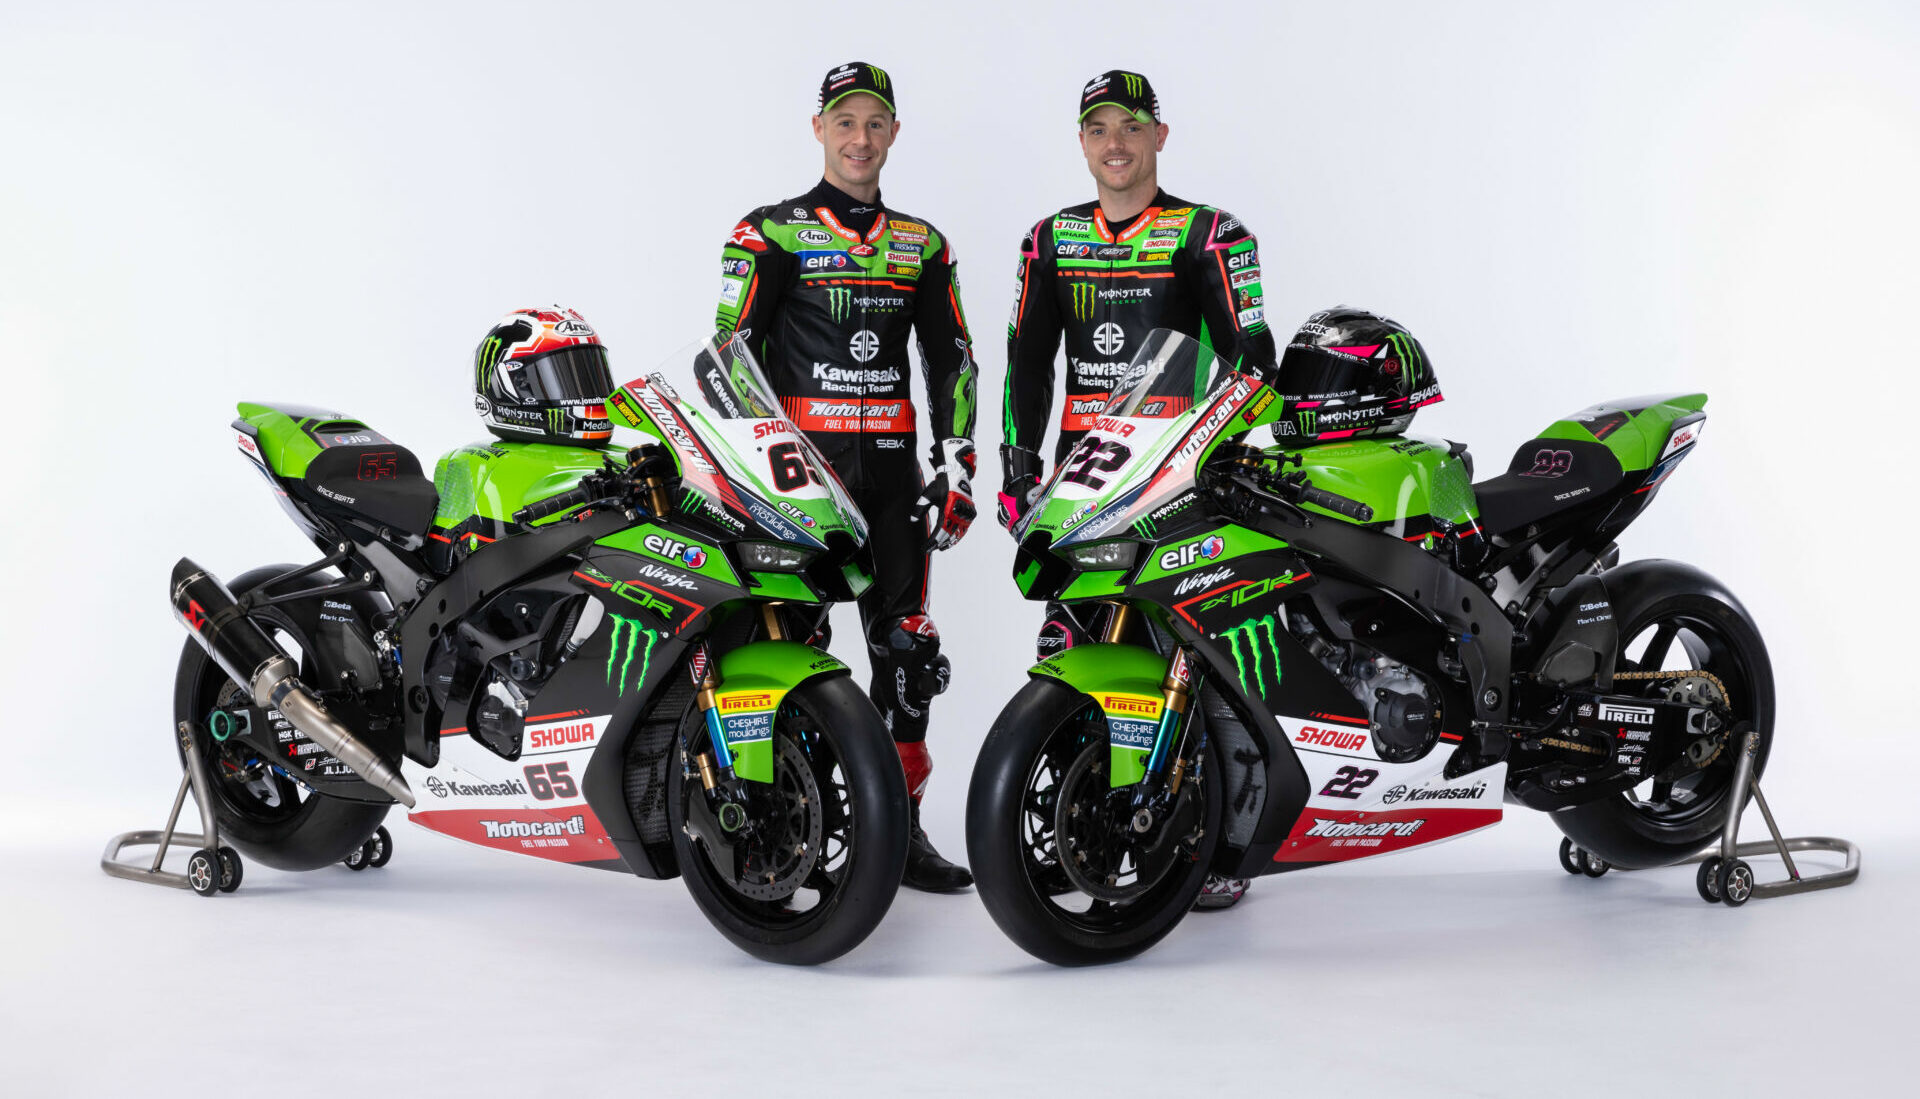 Six-time Superbike World Champion Jonathan Rea (left), his teammate Alex Lowes (right), and their factory Kawasaki ZX-10RR Superbikes in their 2022 liveries. Photo courtesy Kawasaki.